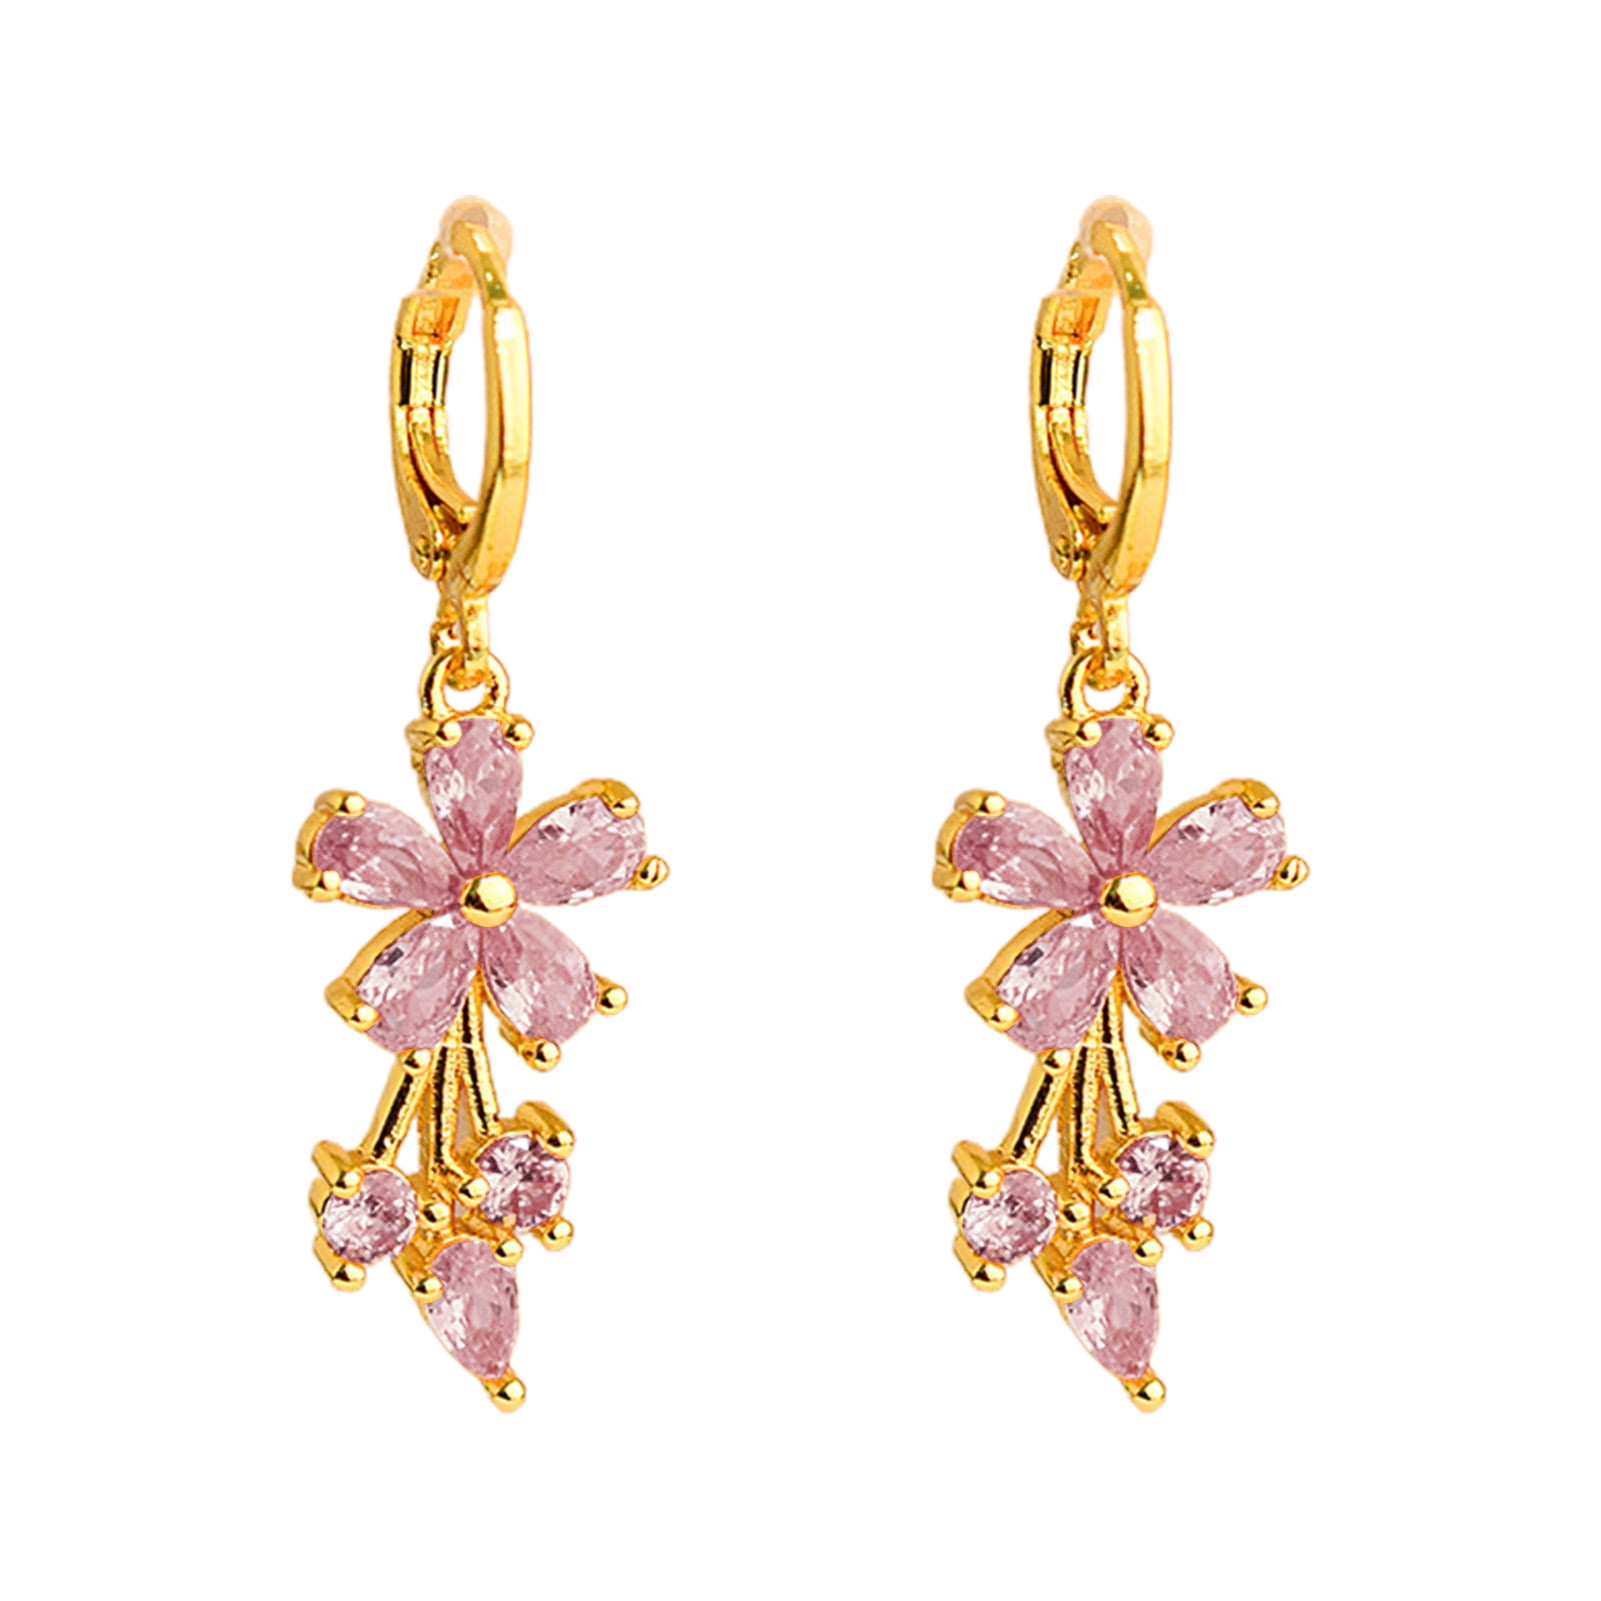 Details about   1.5 Ct Cubic Zirconia Earring Drop/Dangle Women Jewelry 14K Rose Gold Plated